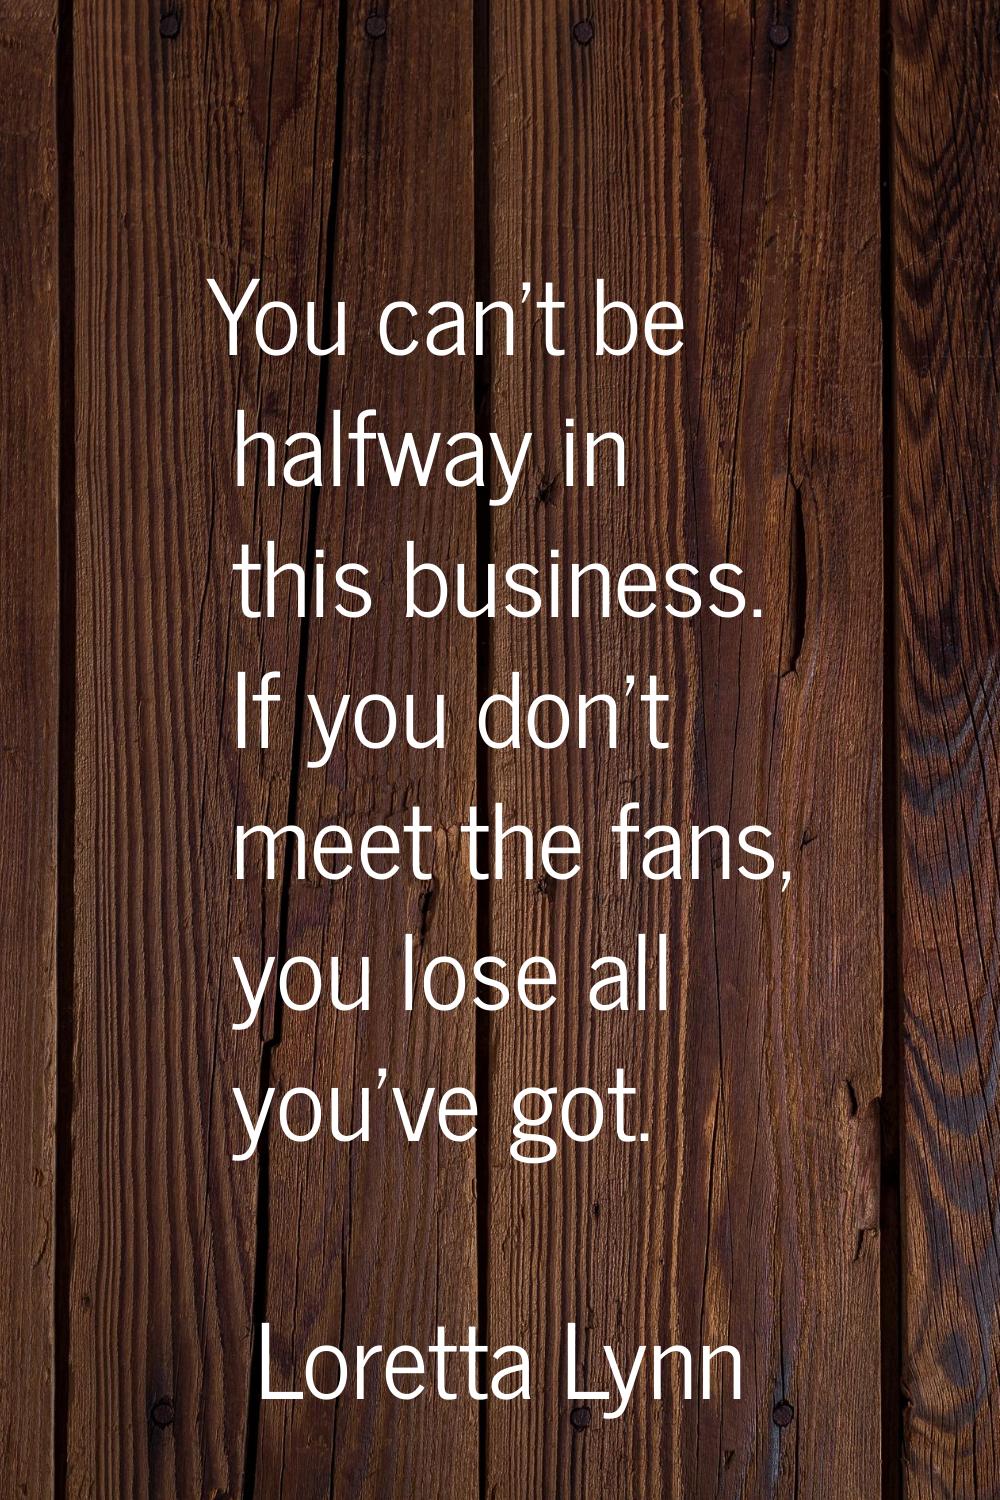 You can't be halfway in this business. If you don't meet the fans, you lose all you've got.